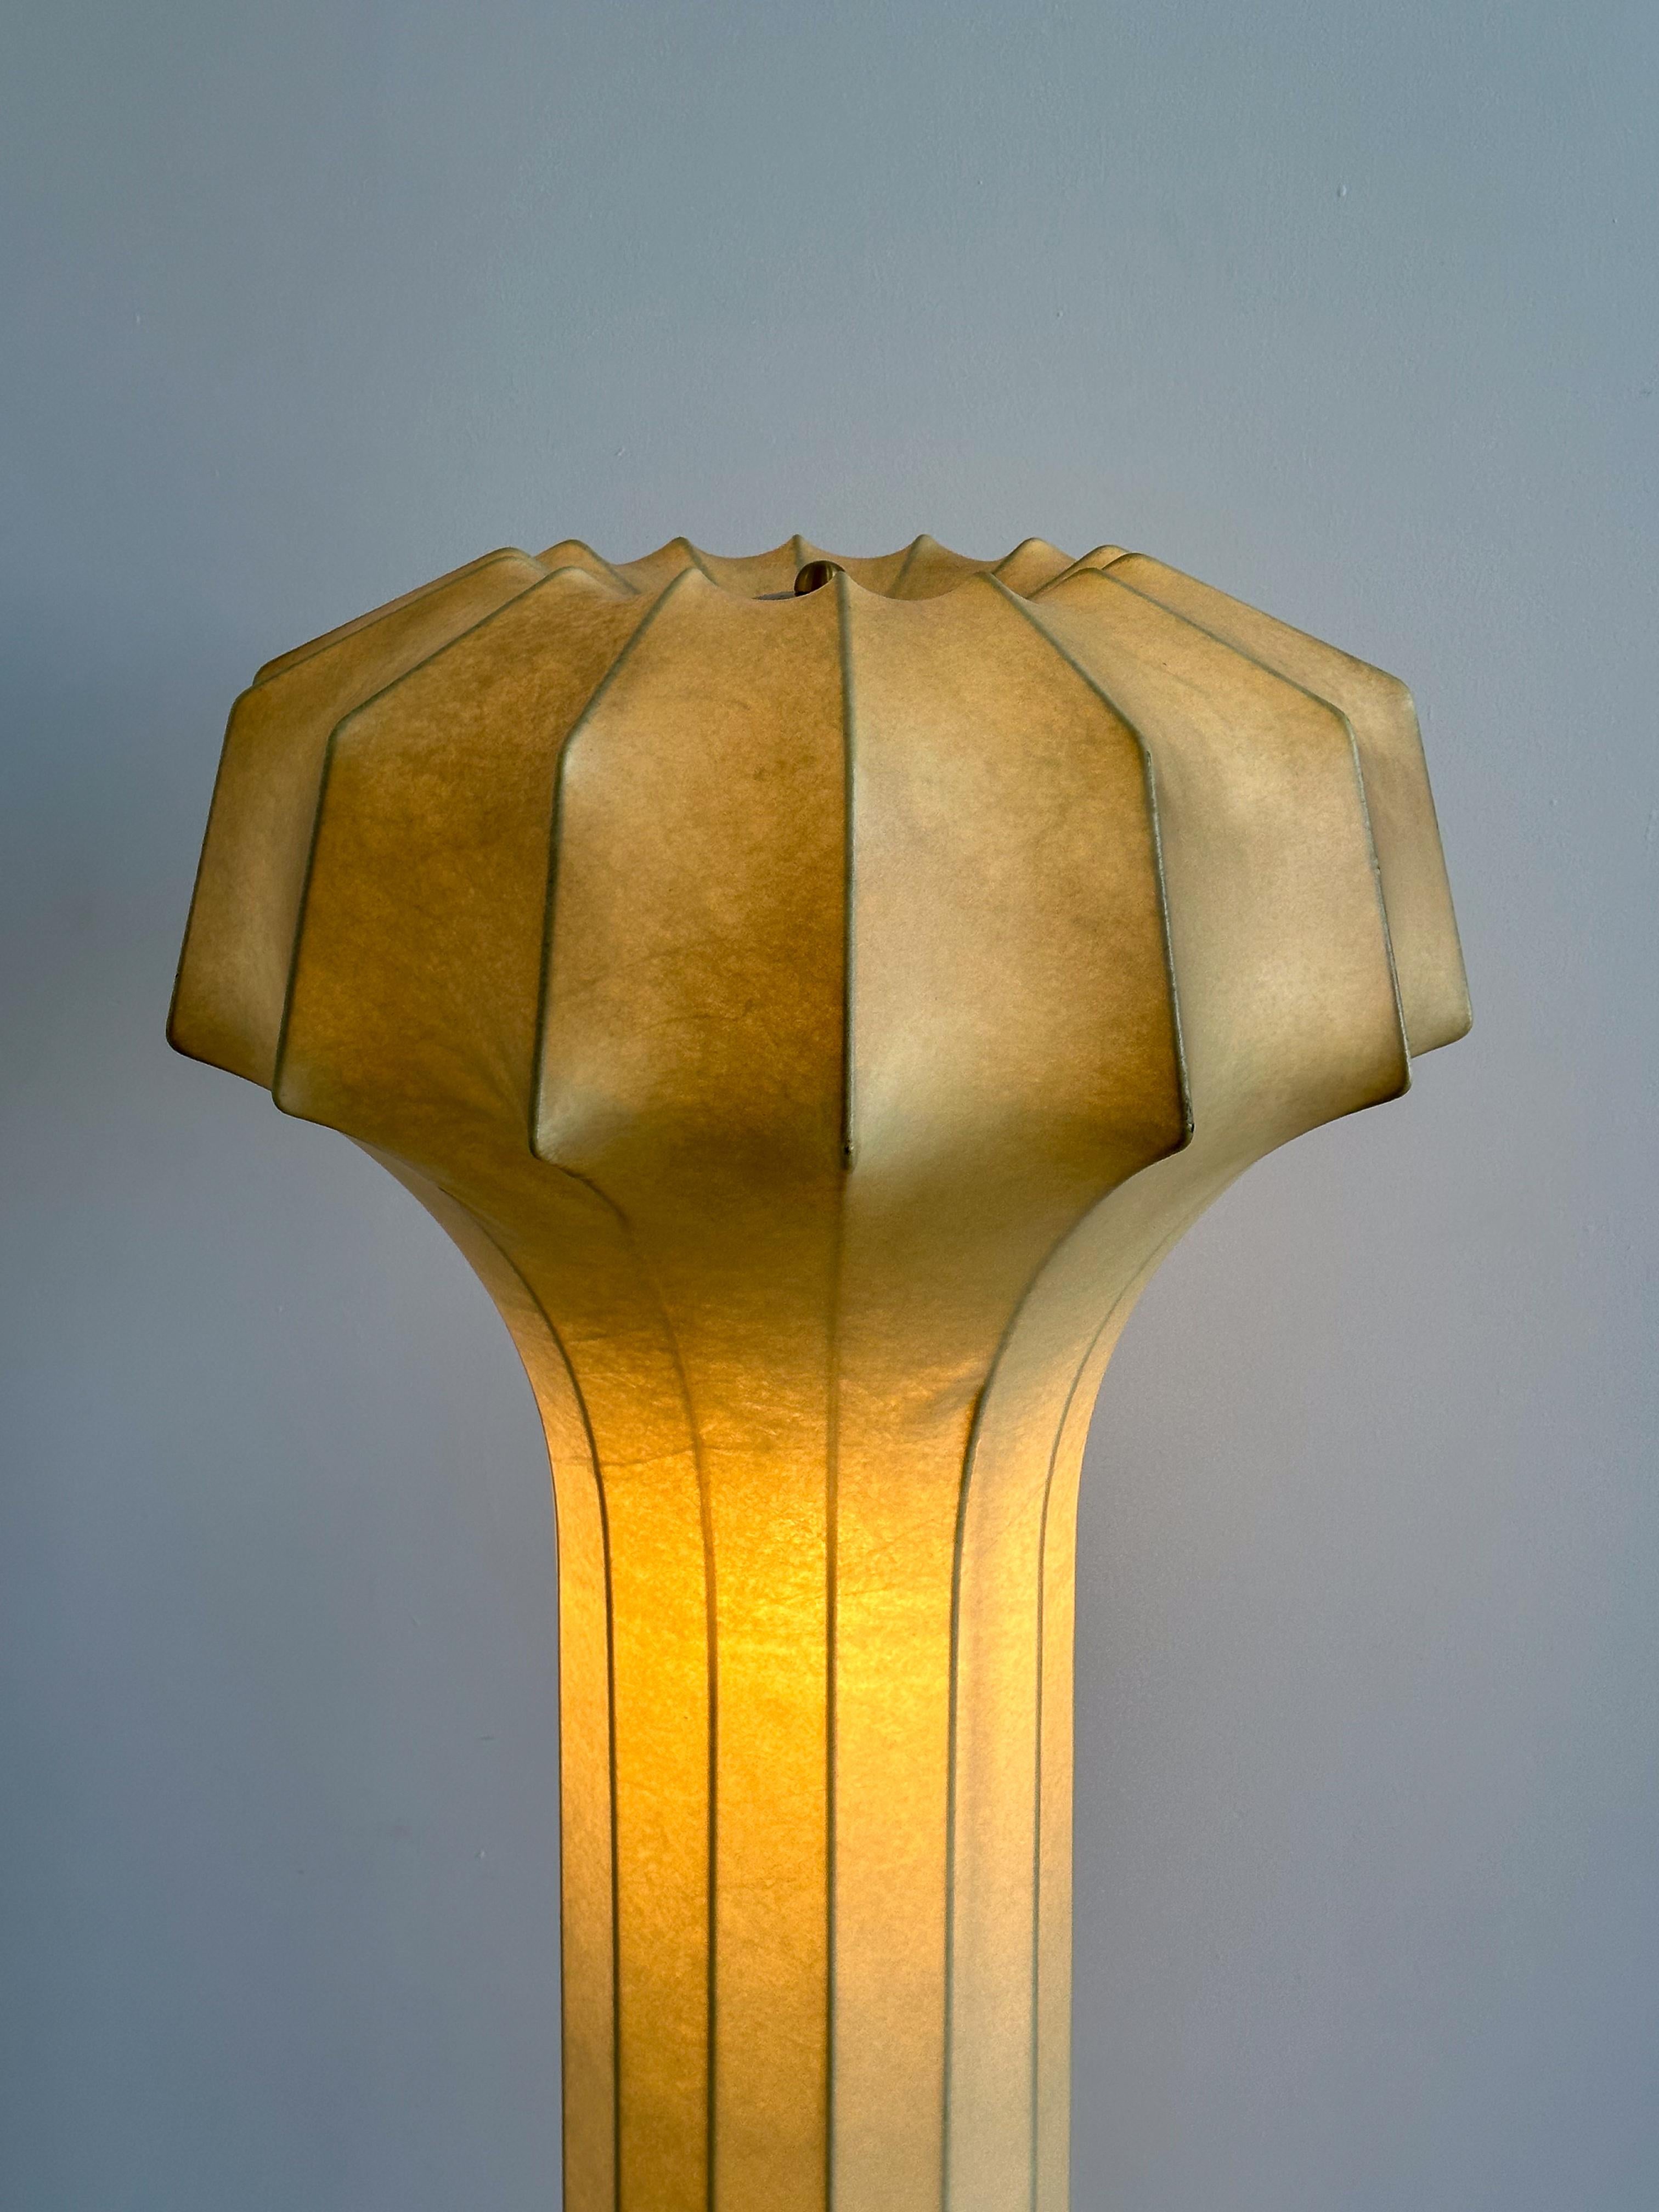 Achille & Pier Giacomo Castiglioni Cocoon Floor Lamp In Good Condition For Sale In Byron Bay, NSW